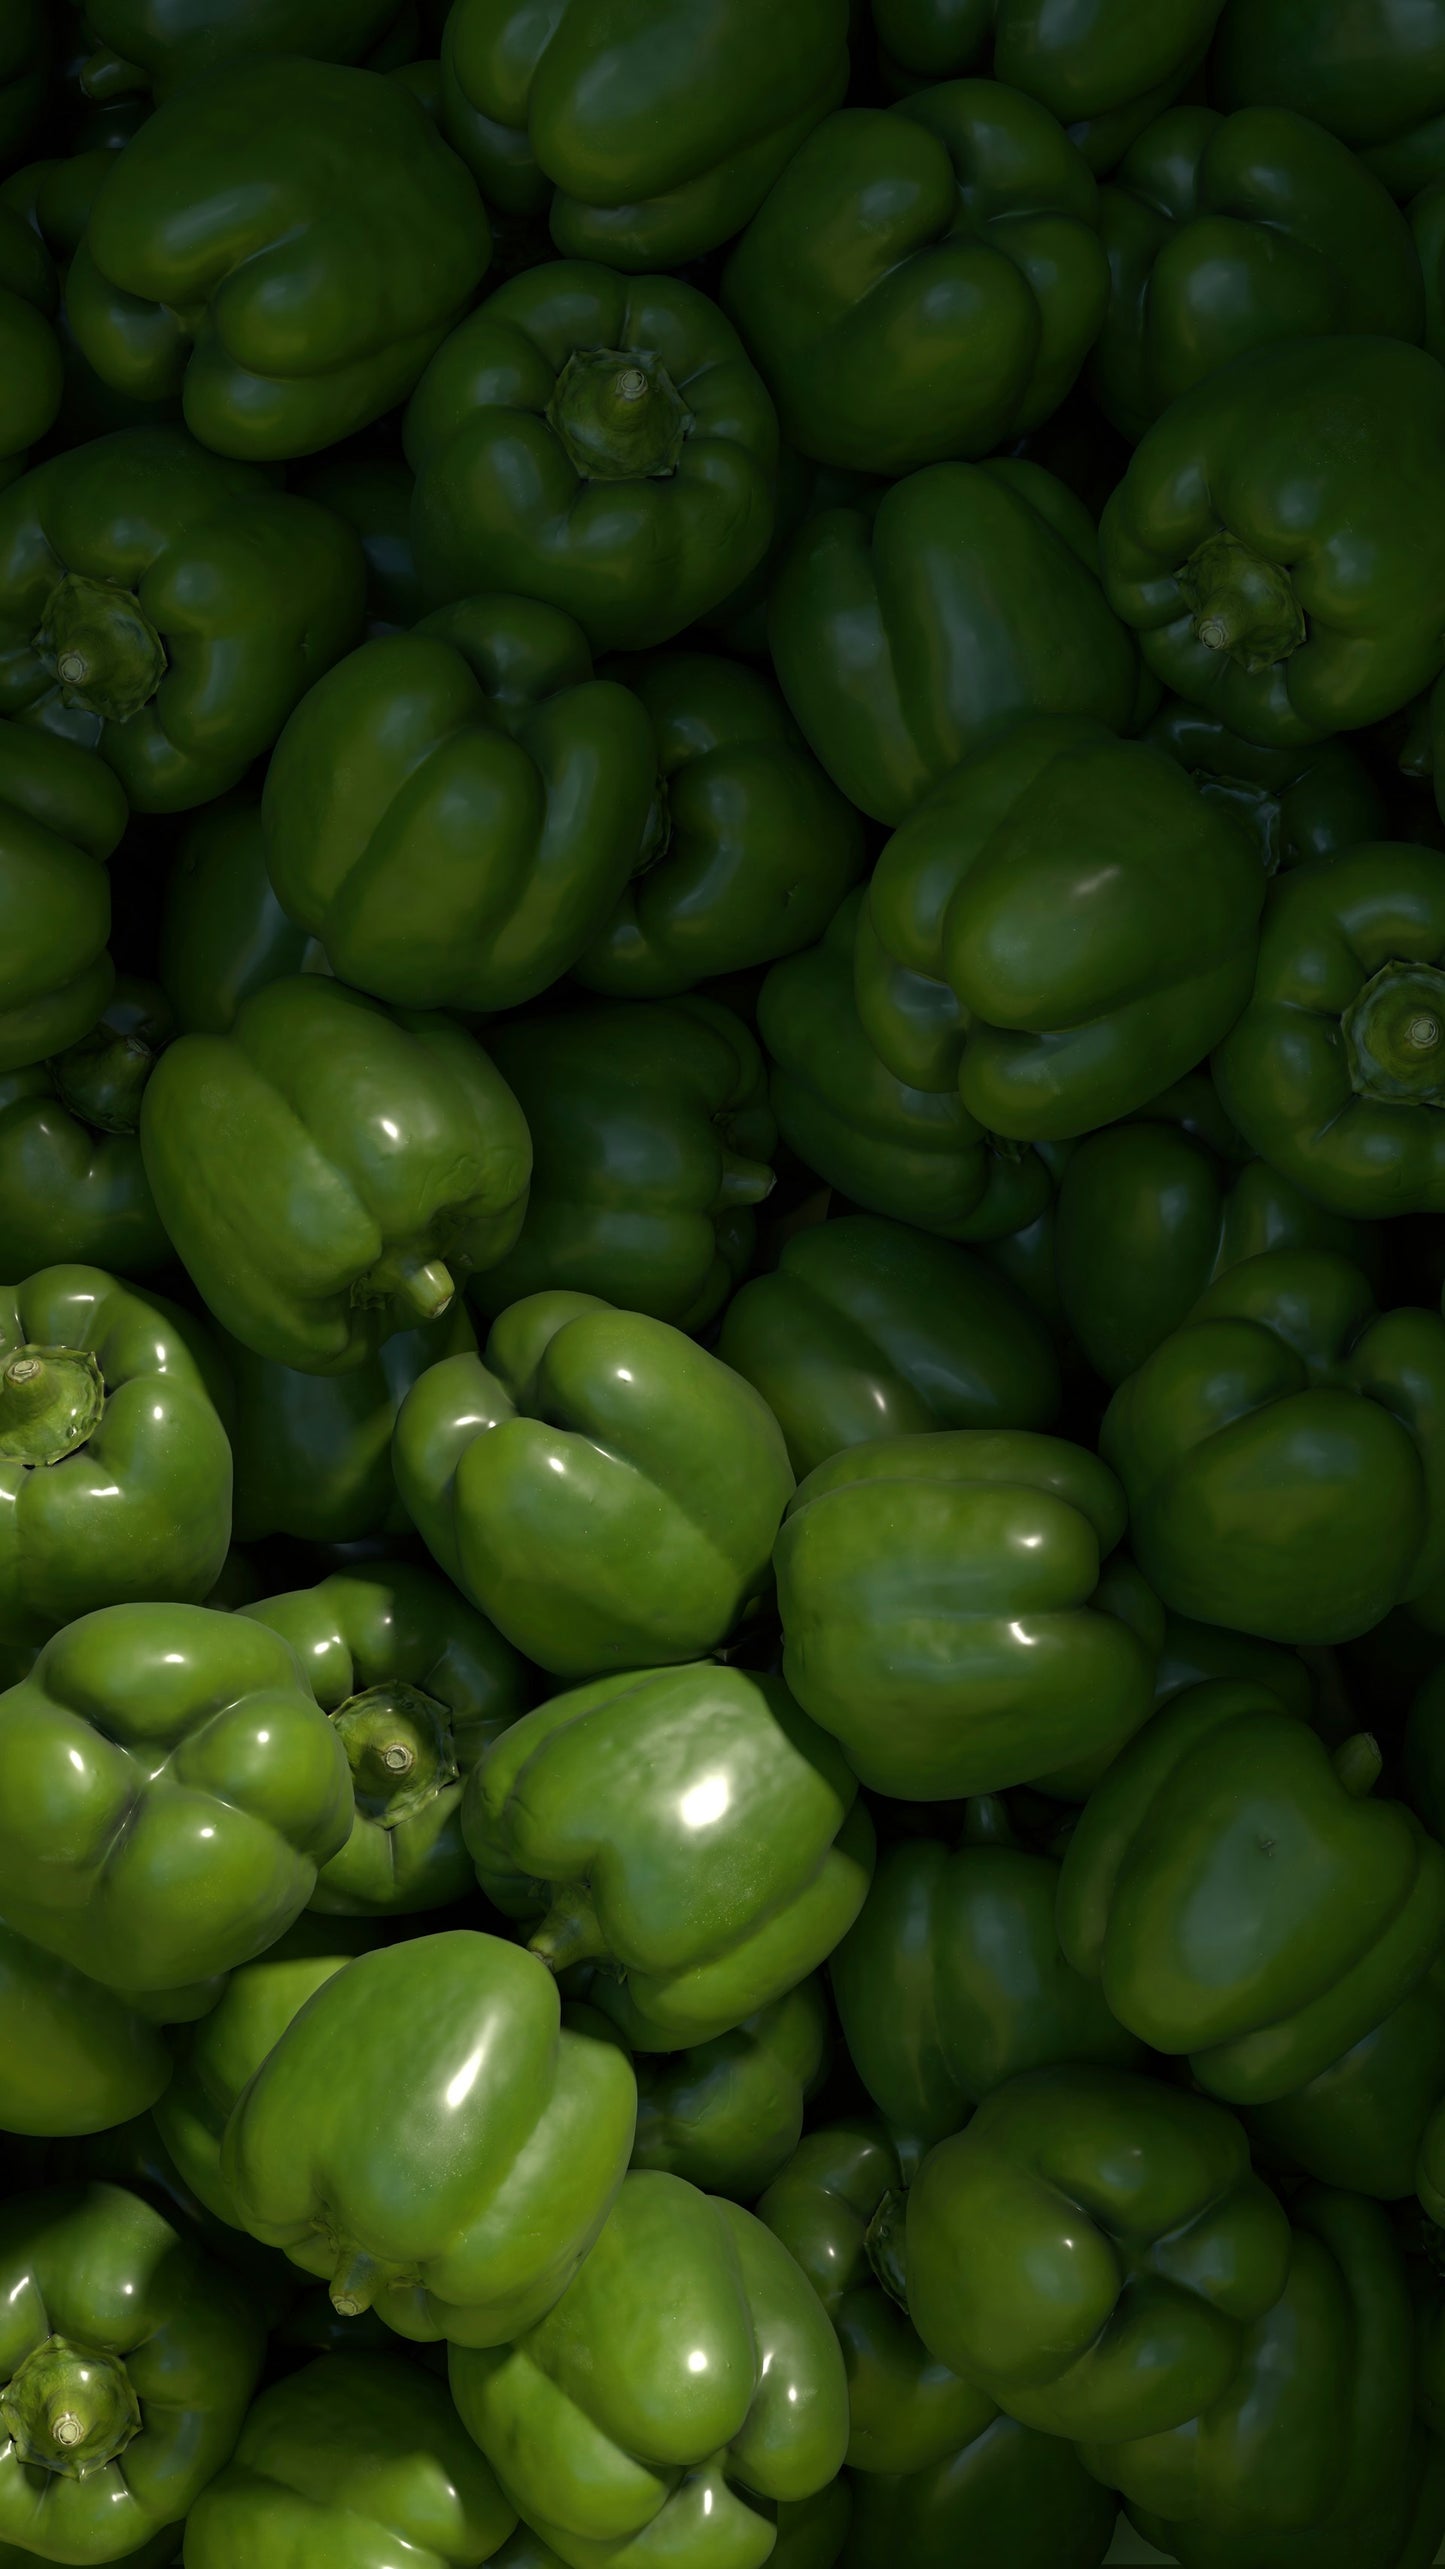 On display is a huge bunching of green bell peppers, of the variety Sweet Cal Wonder 300 TMR. The image is zoomed so we cannot see the container they are held in. There are a huge number of the peppers shown. 